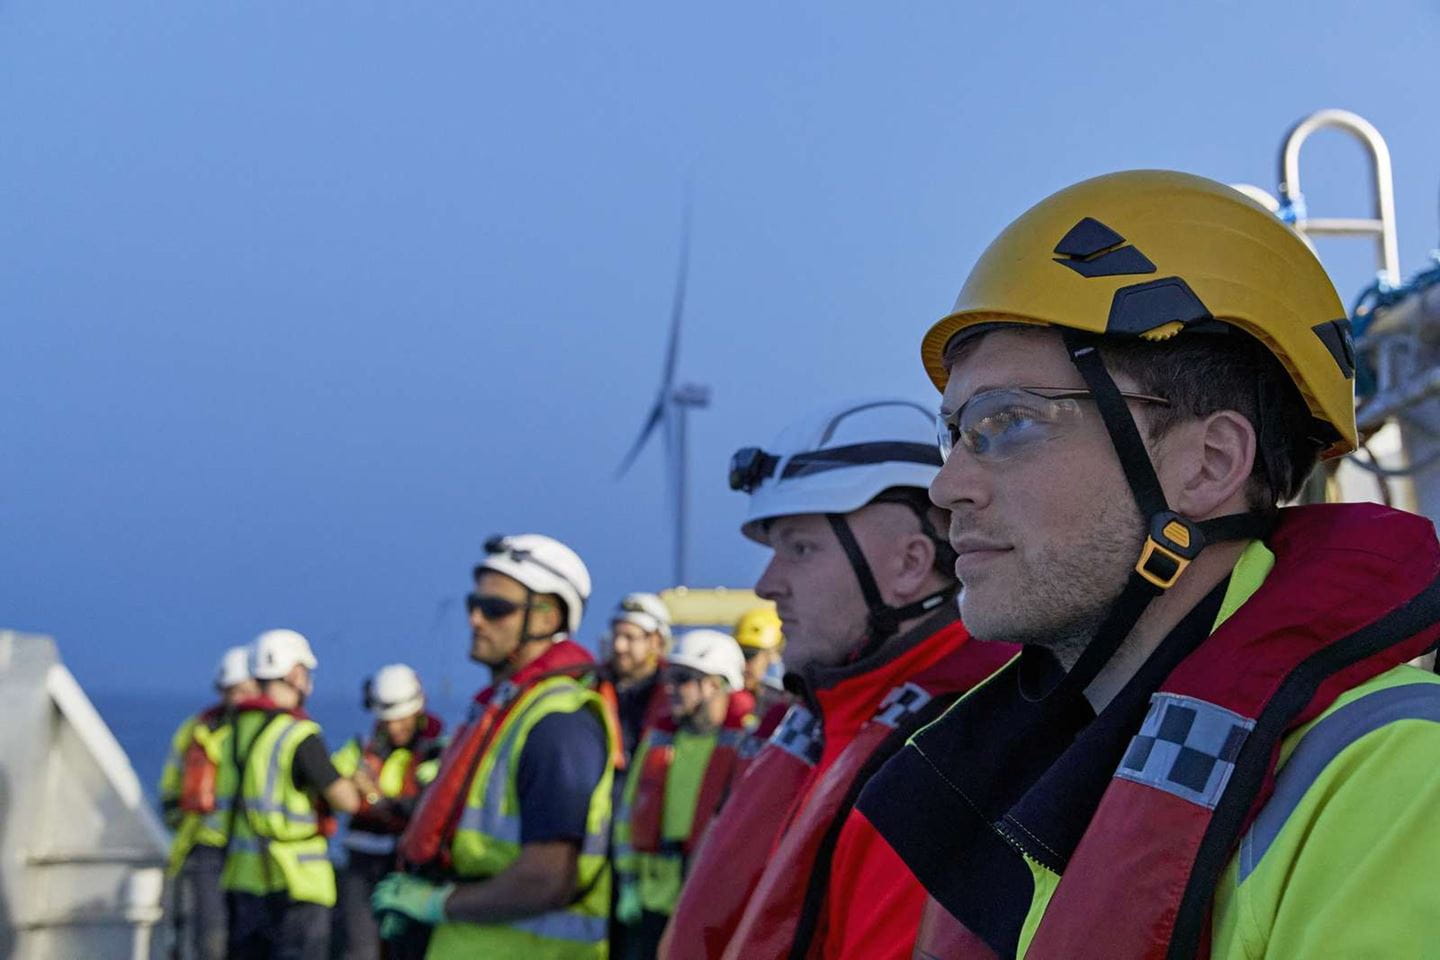 Ørsted technicians working at the Hornsea 2 offshore wind farm